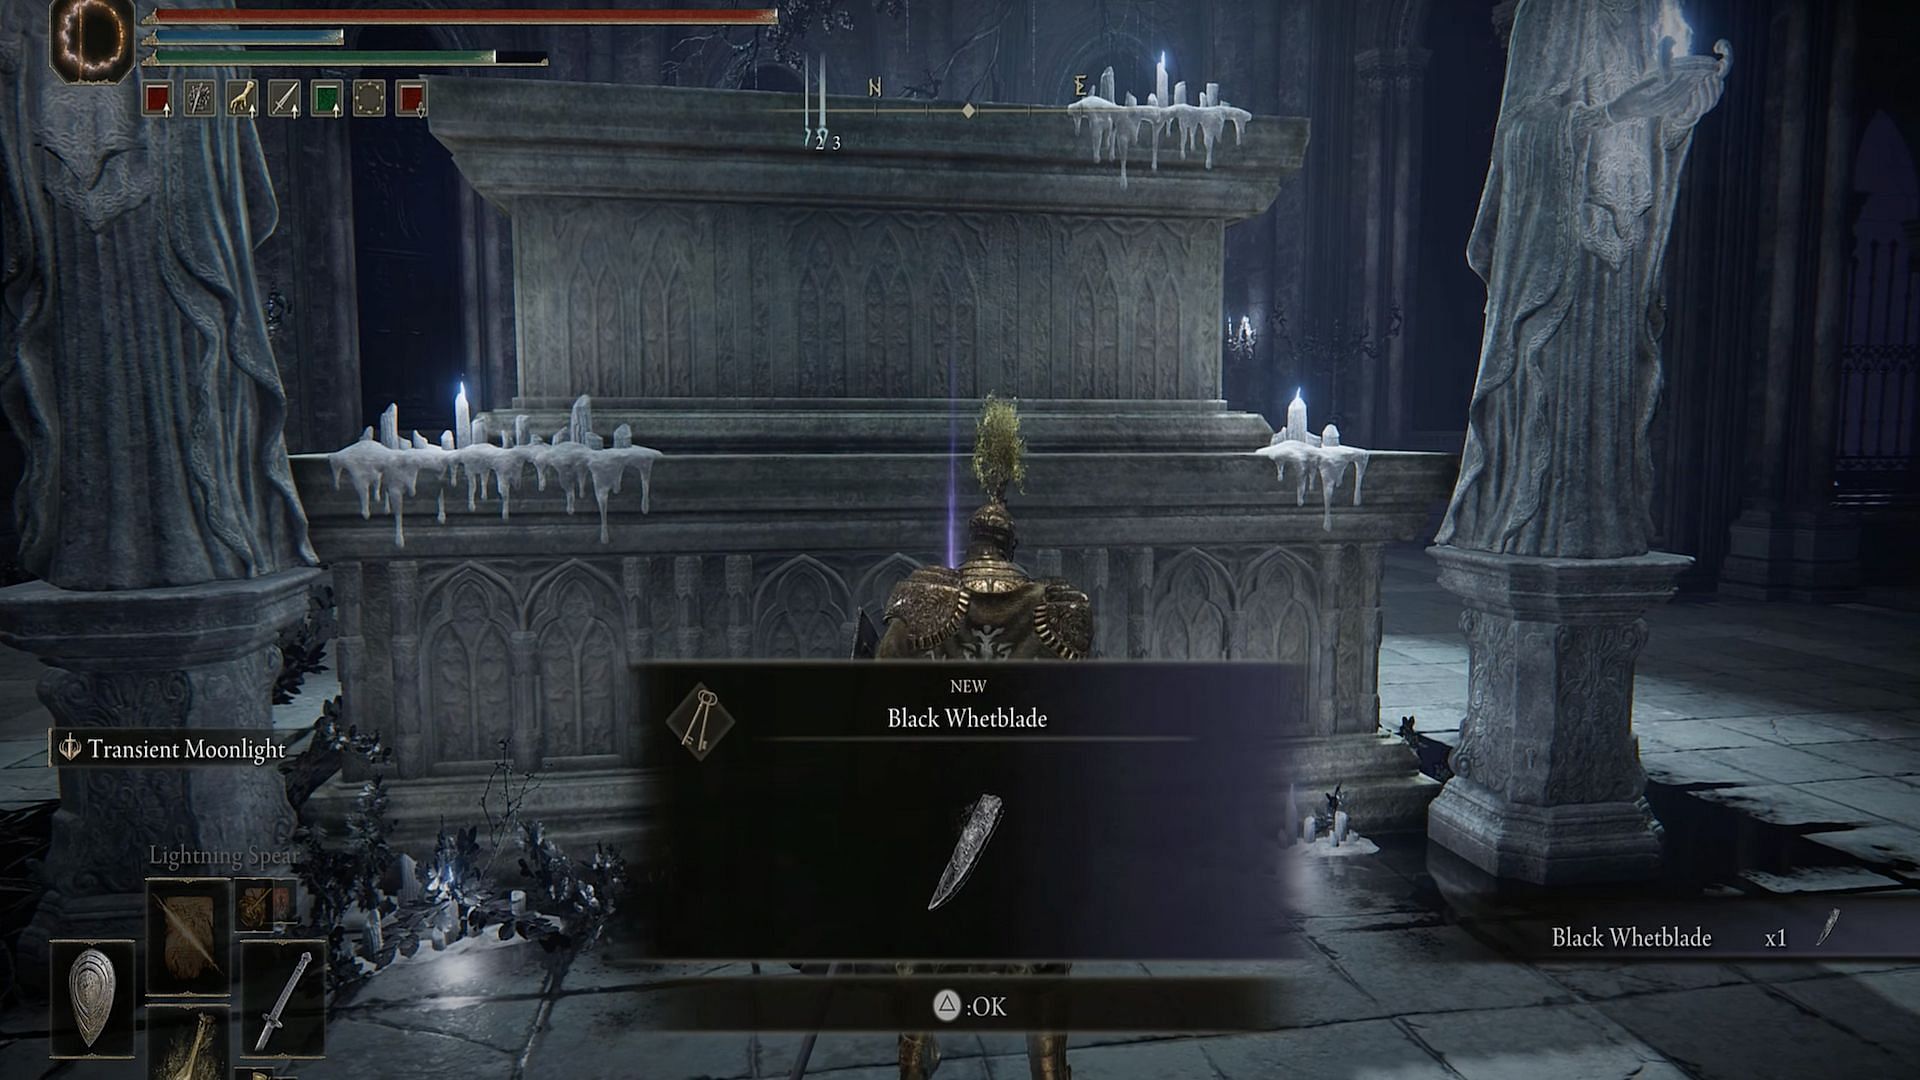 Elden Ring players can obtain the Poison affinity by collecting the Black Whetblade (Image via EternityInGaming/YouTube)